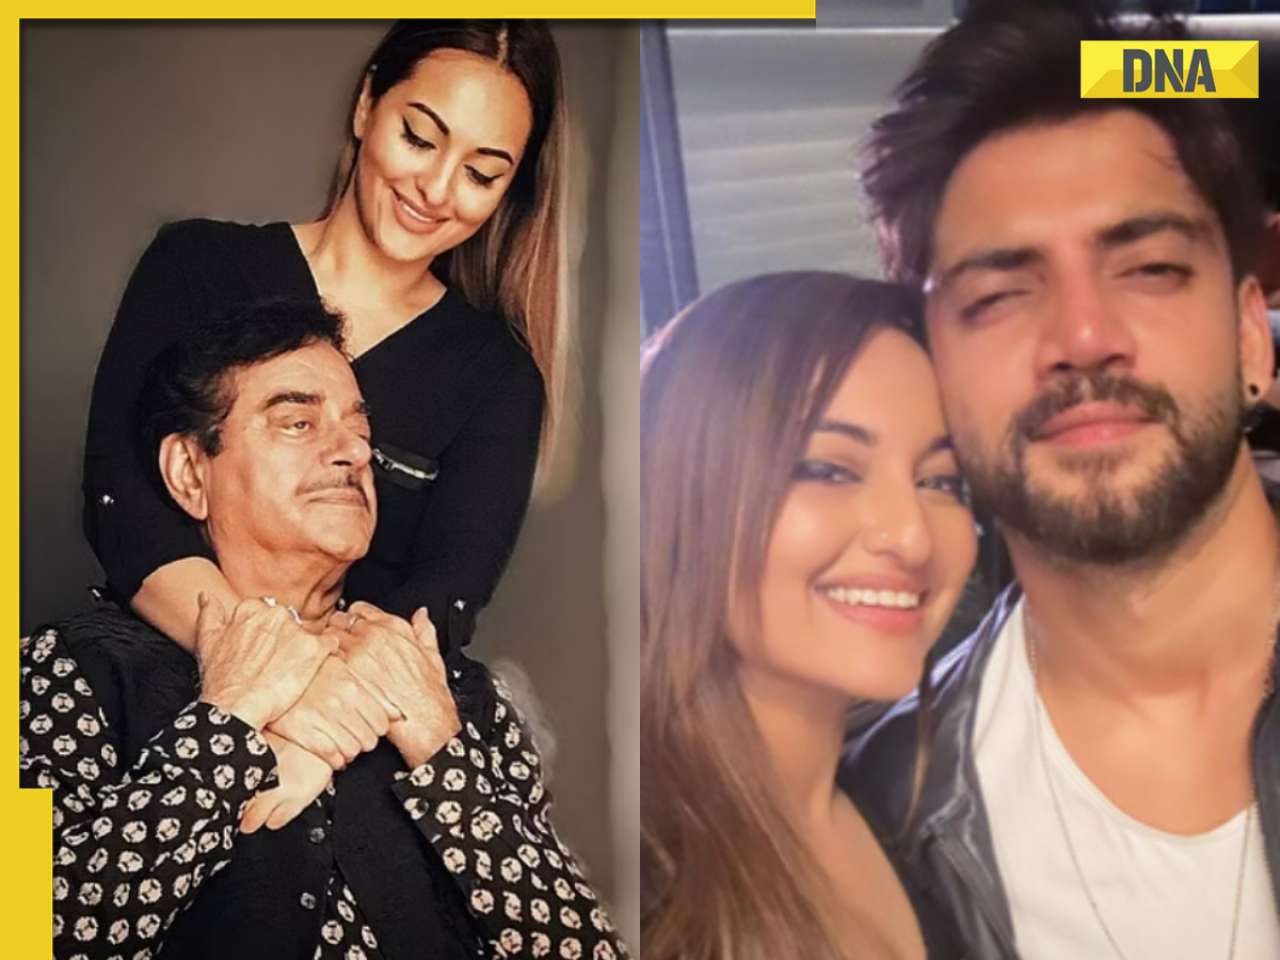 Shatrughan Sinha to not attend Sonakshi Sinha, Zaheer Iqbal's wedding? Family friend says 'he can't...'